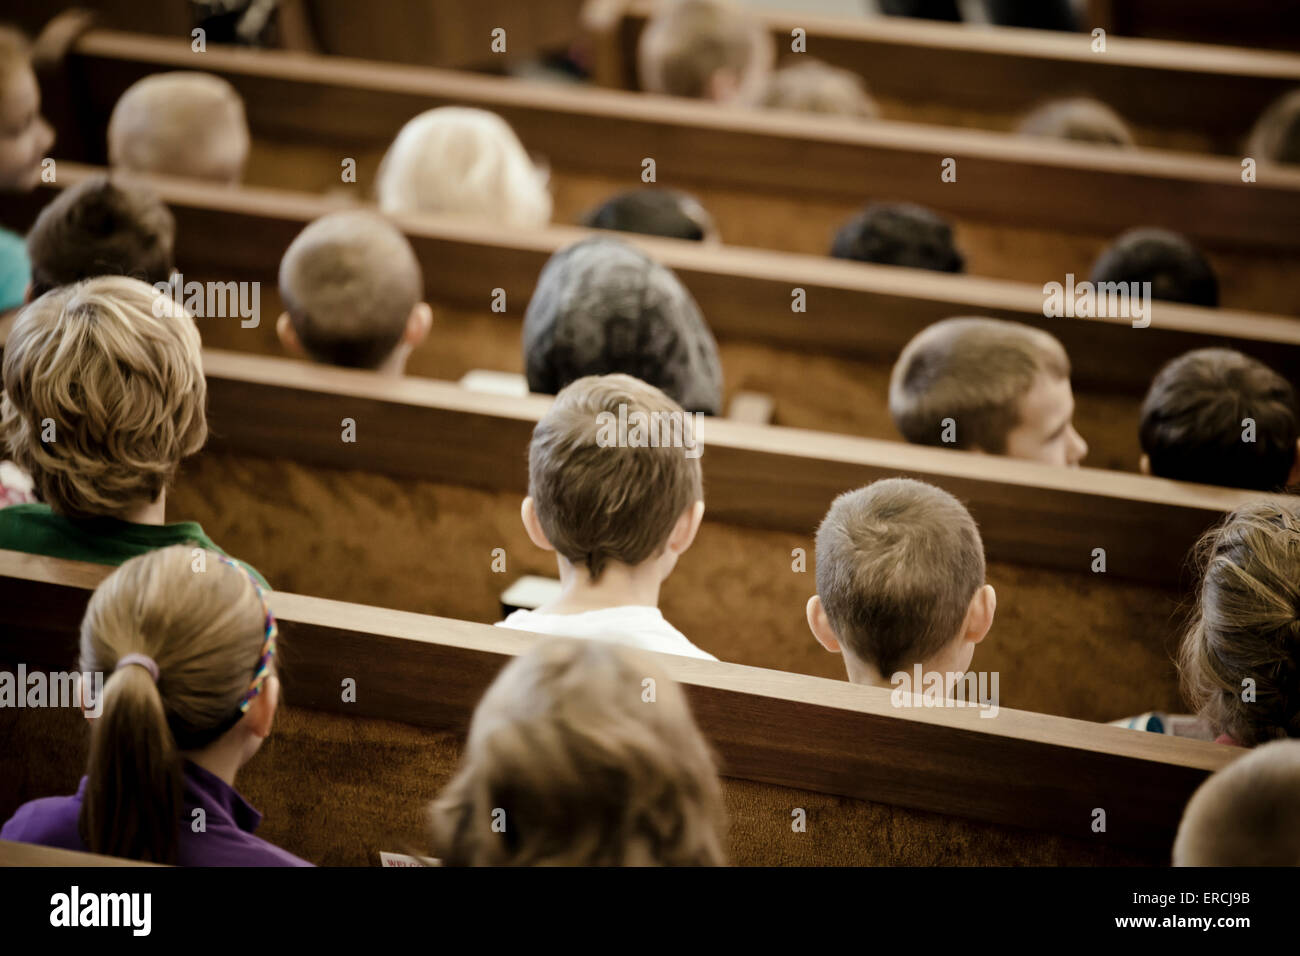 School students sit on benches during assembly. Stock Photo